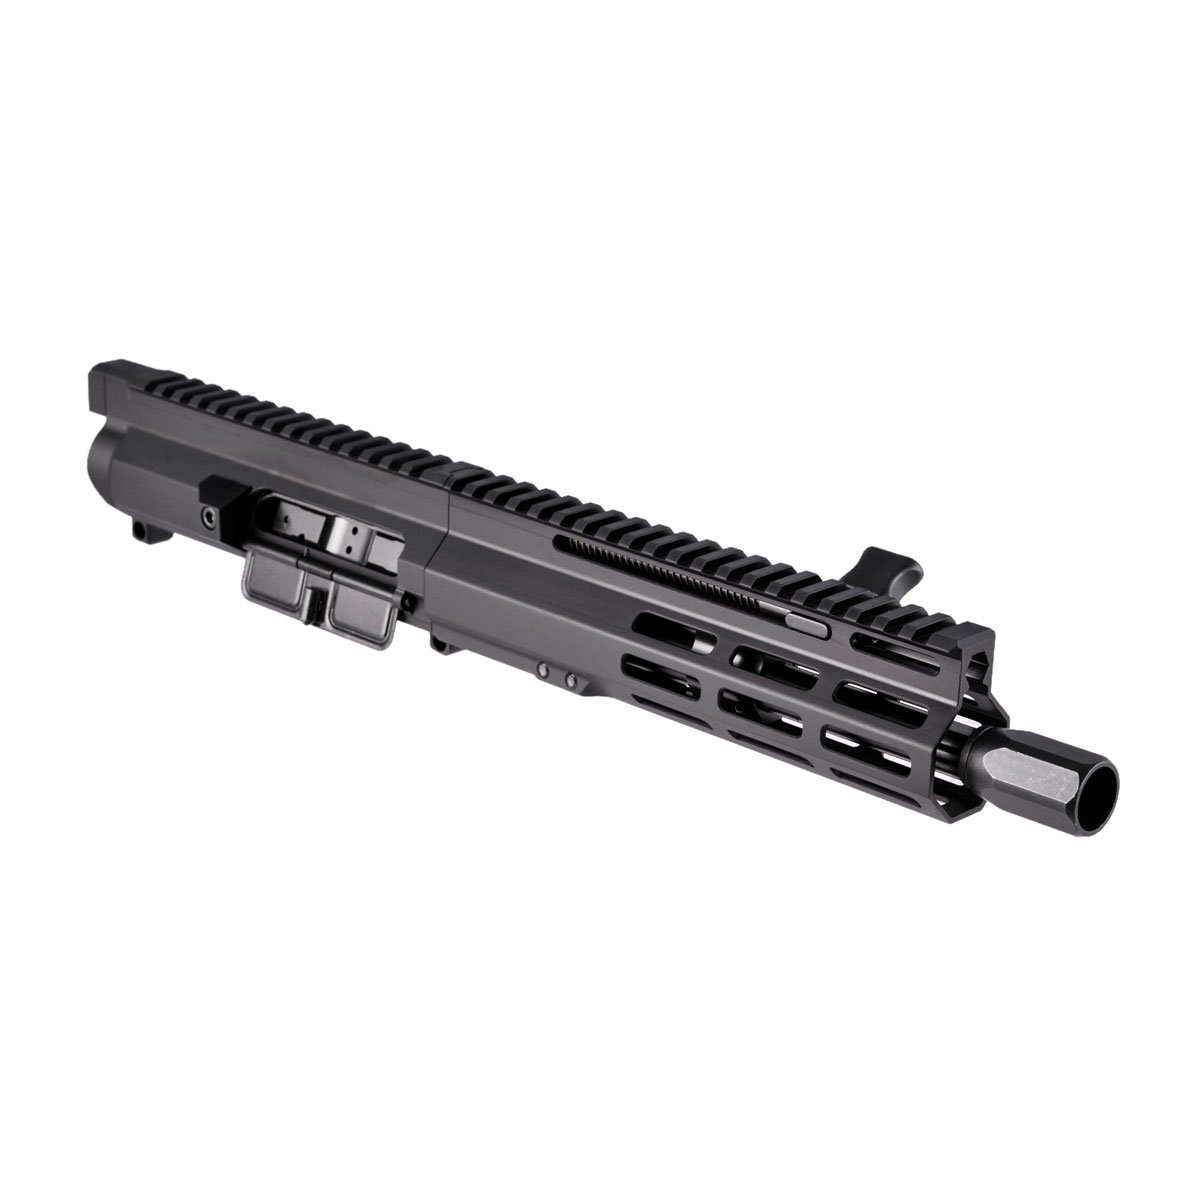 FOXTROT MIKE PRODUCTS - MIKE 102 GEN 2 UPPER KITS